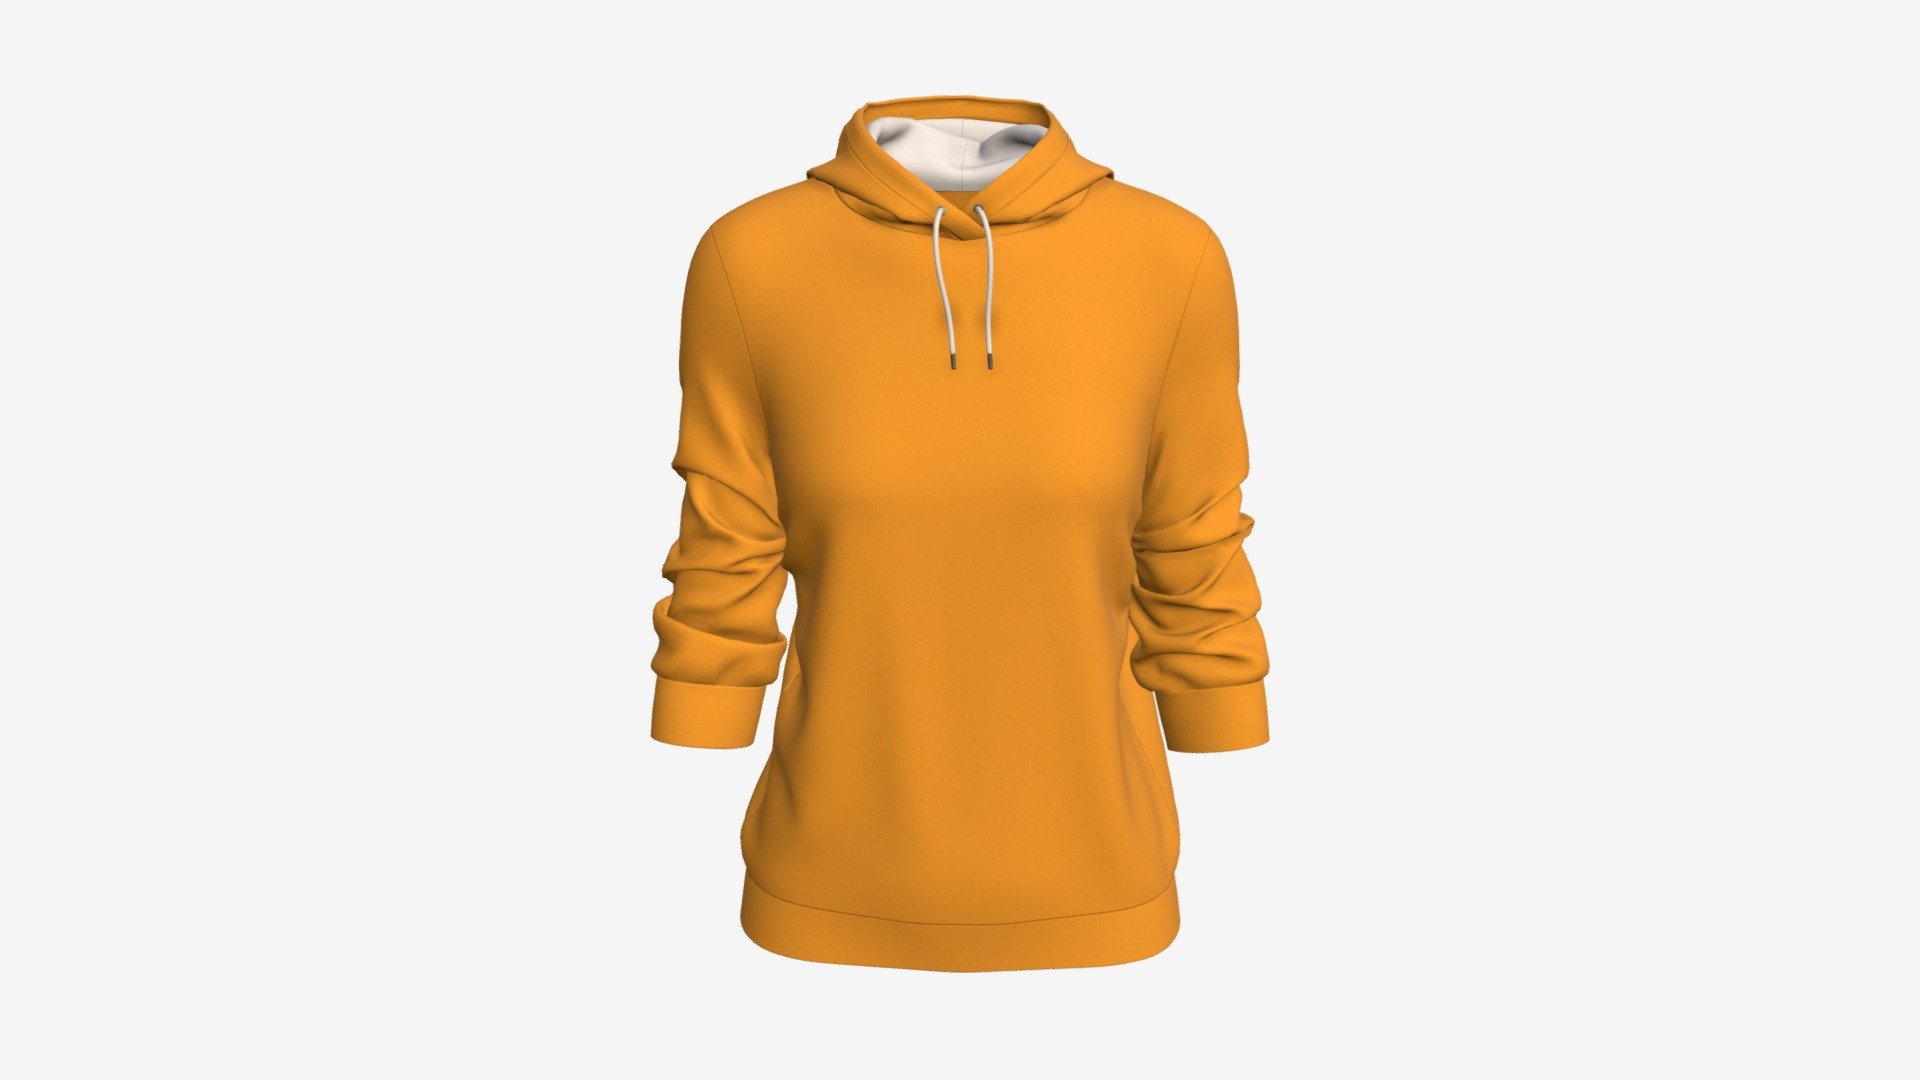 Hoodie for Women Mockup 03 Yellow - Buy Royalty Free 3D model by ...